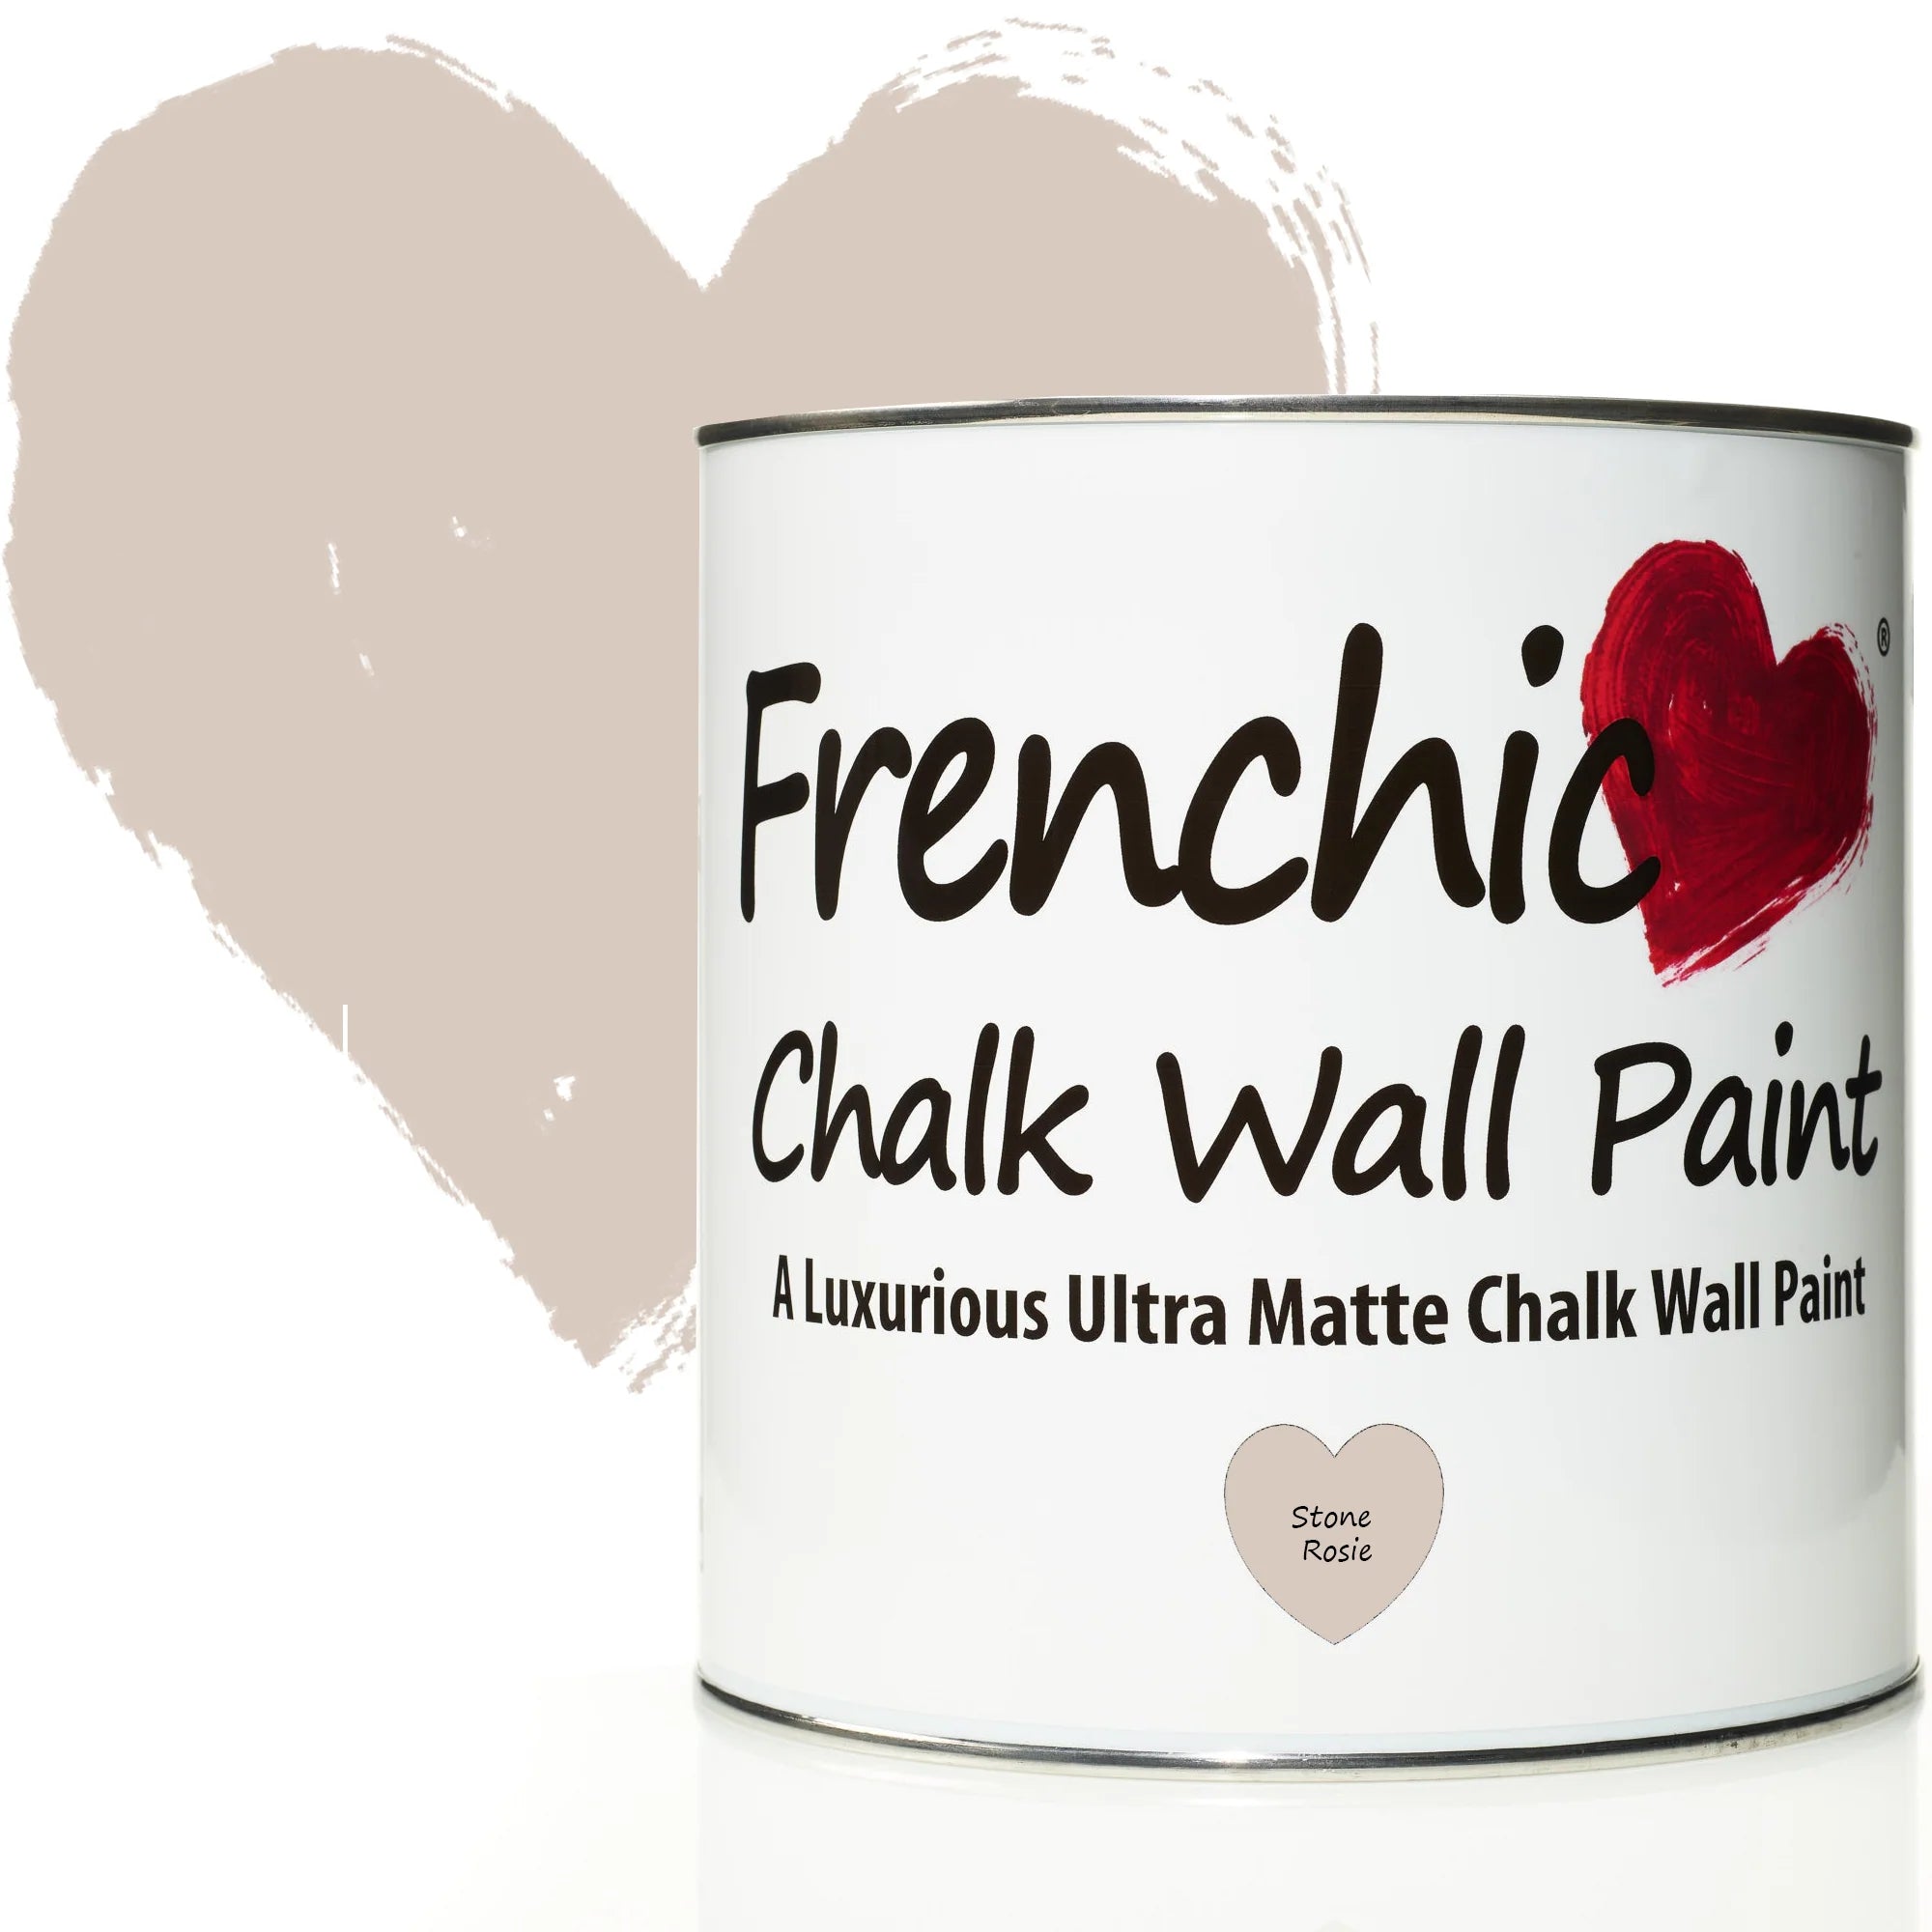 Frenchic Paint Stone Rosie Wall Paint 2.5L Frenchic Paint Chalk Wall Paint Range by Weirs of Baggot Street Irelands Largest and most Trusted Stockist of Frenchic Paint. Shop online for Nationwide and Same Day Dublin Delivery